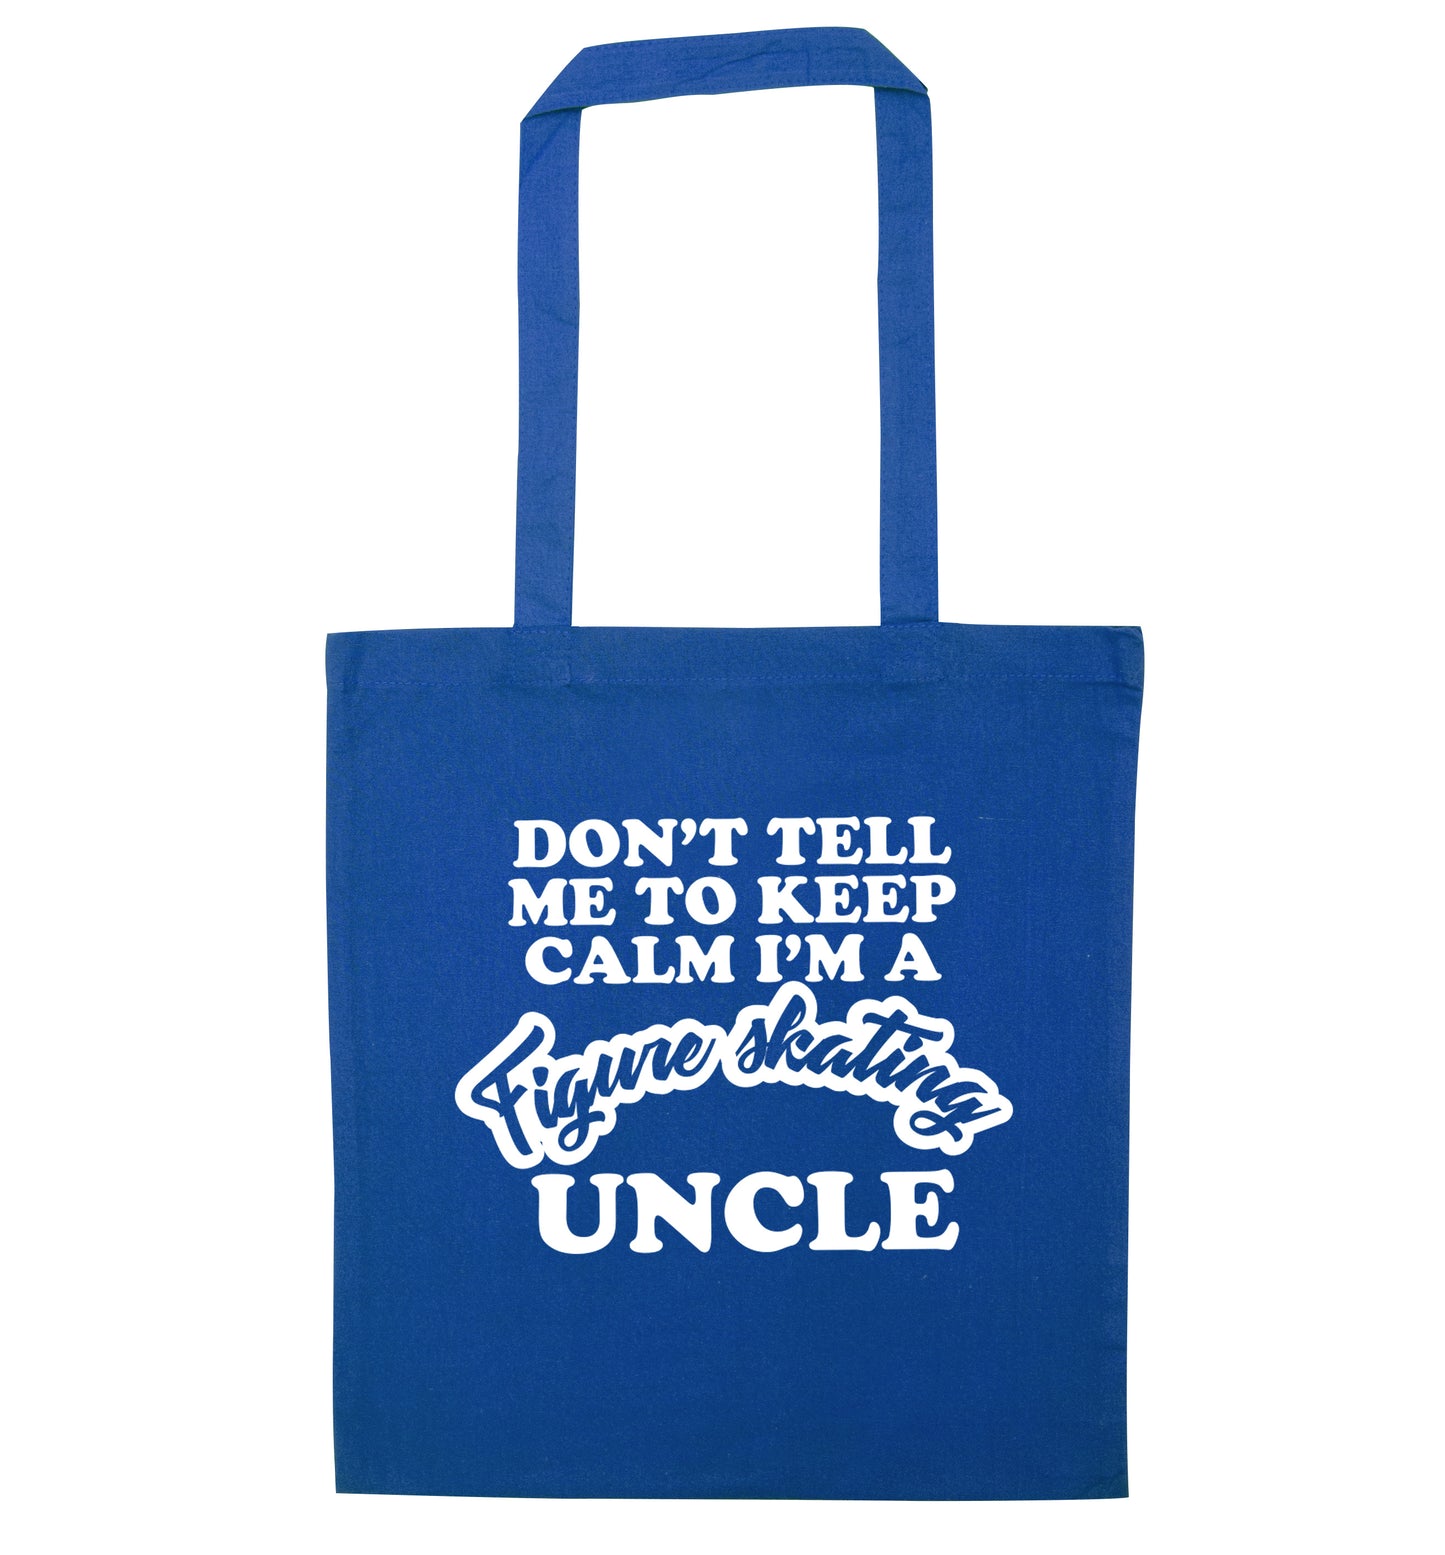 Don't tell me to keep calm I'm a figure skating uncle blue tote bag